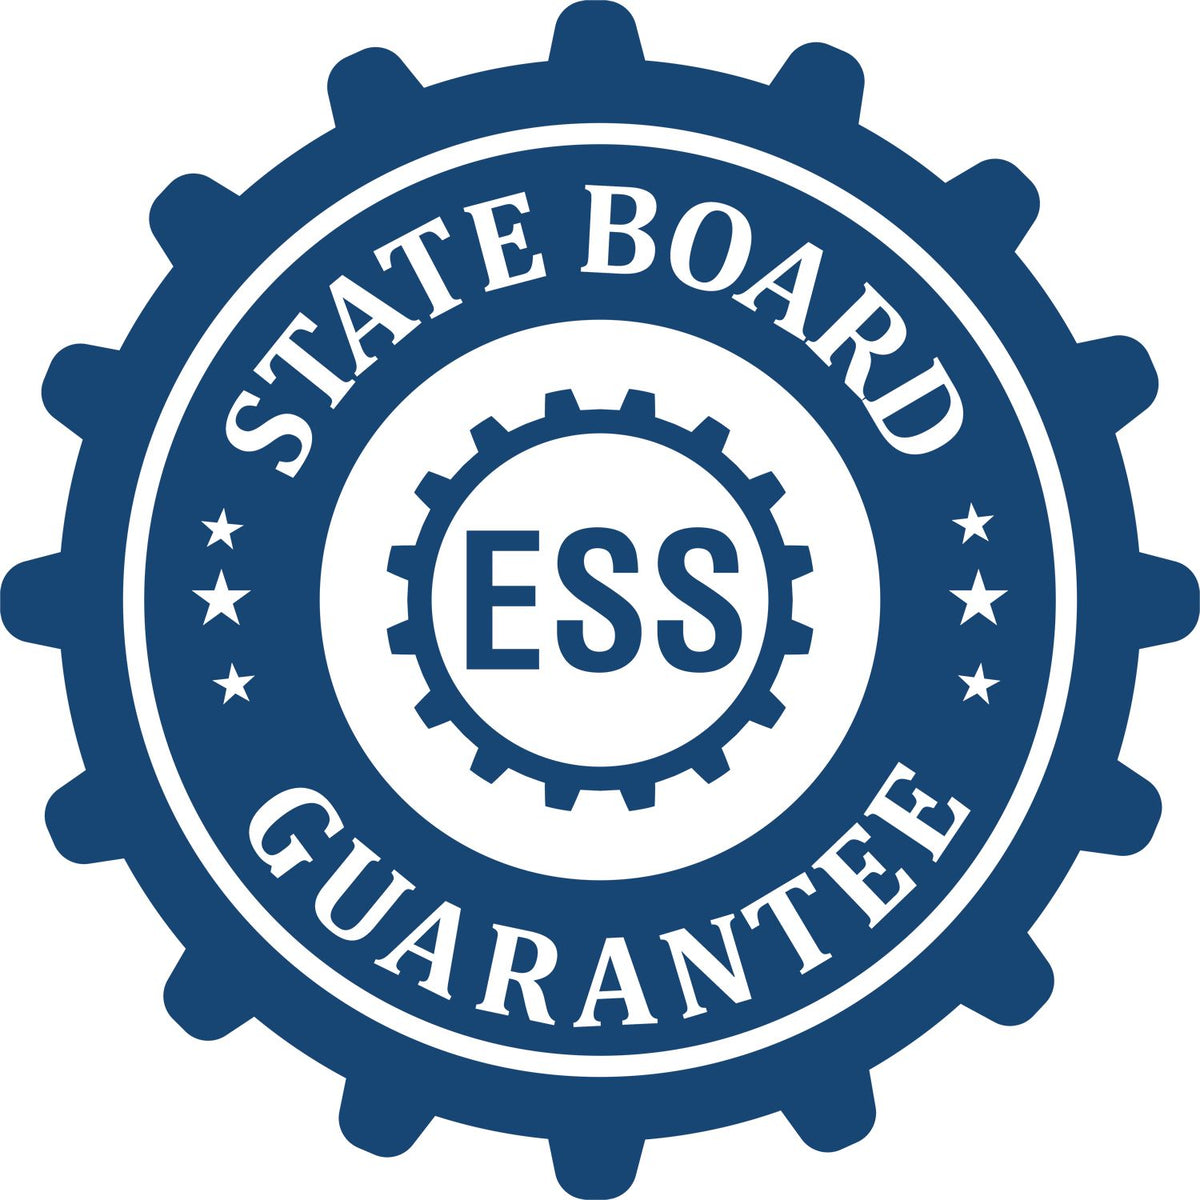 An emblem in a gear shape illustrating a state board guarantee for the West Virginia Desk Architect Embossing Seal product.